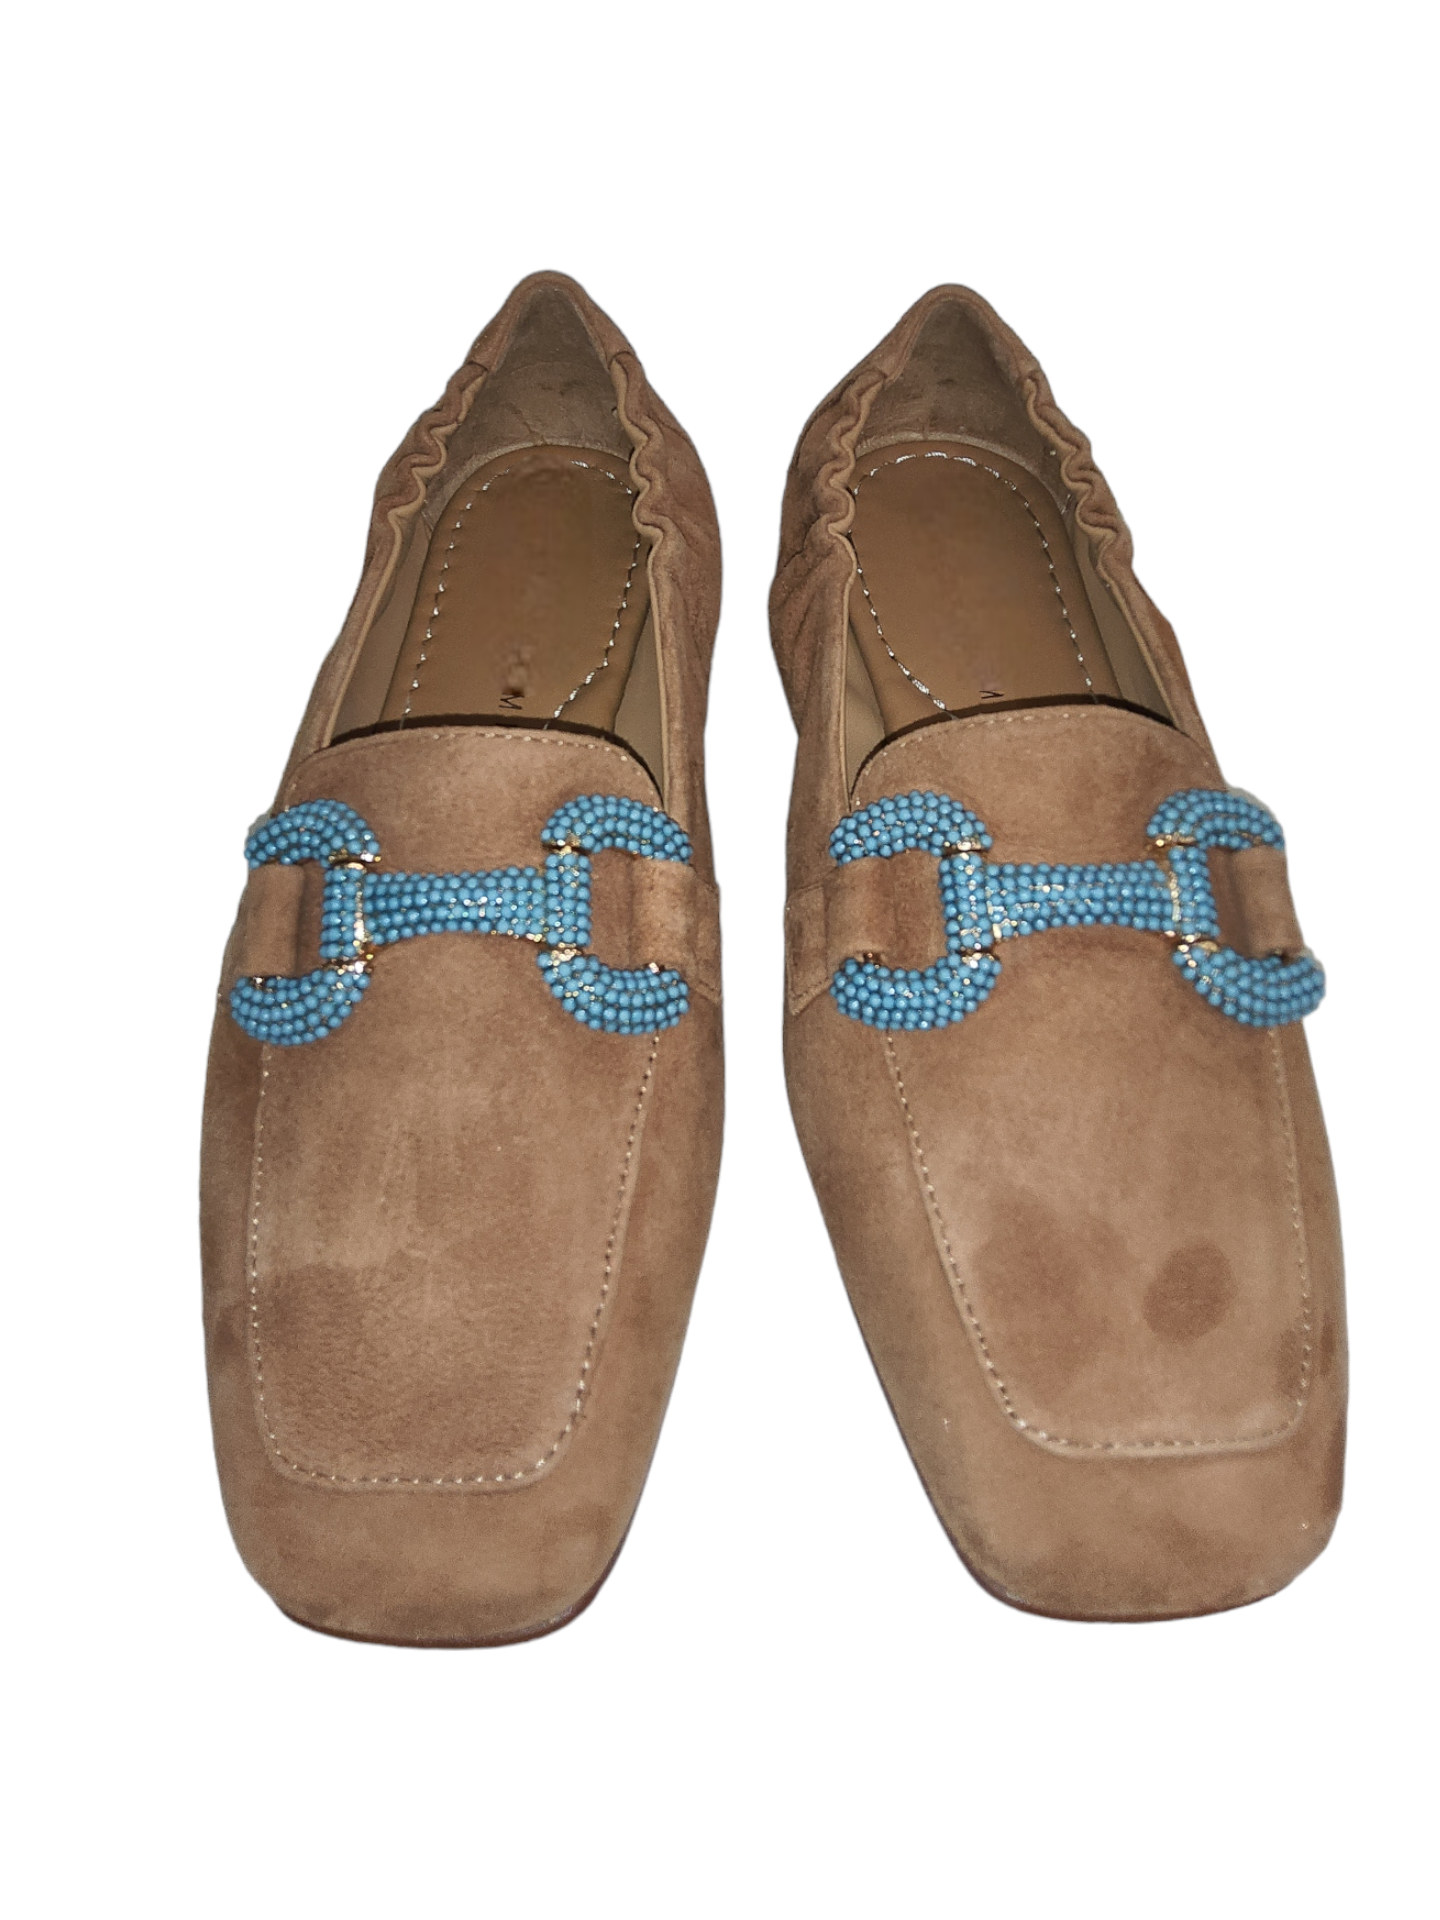 Tan leather loafers